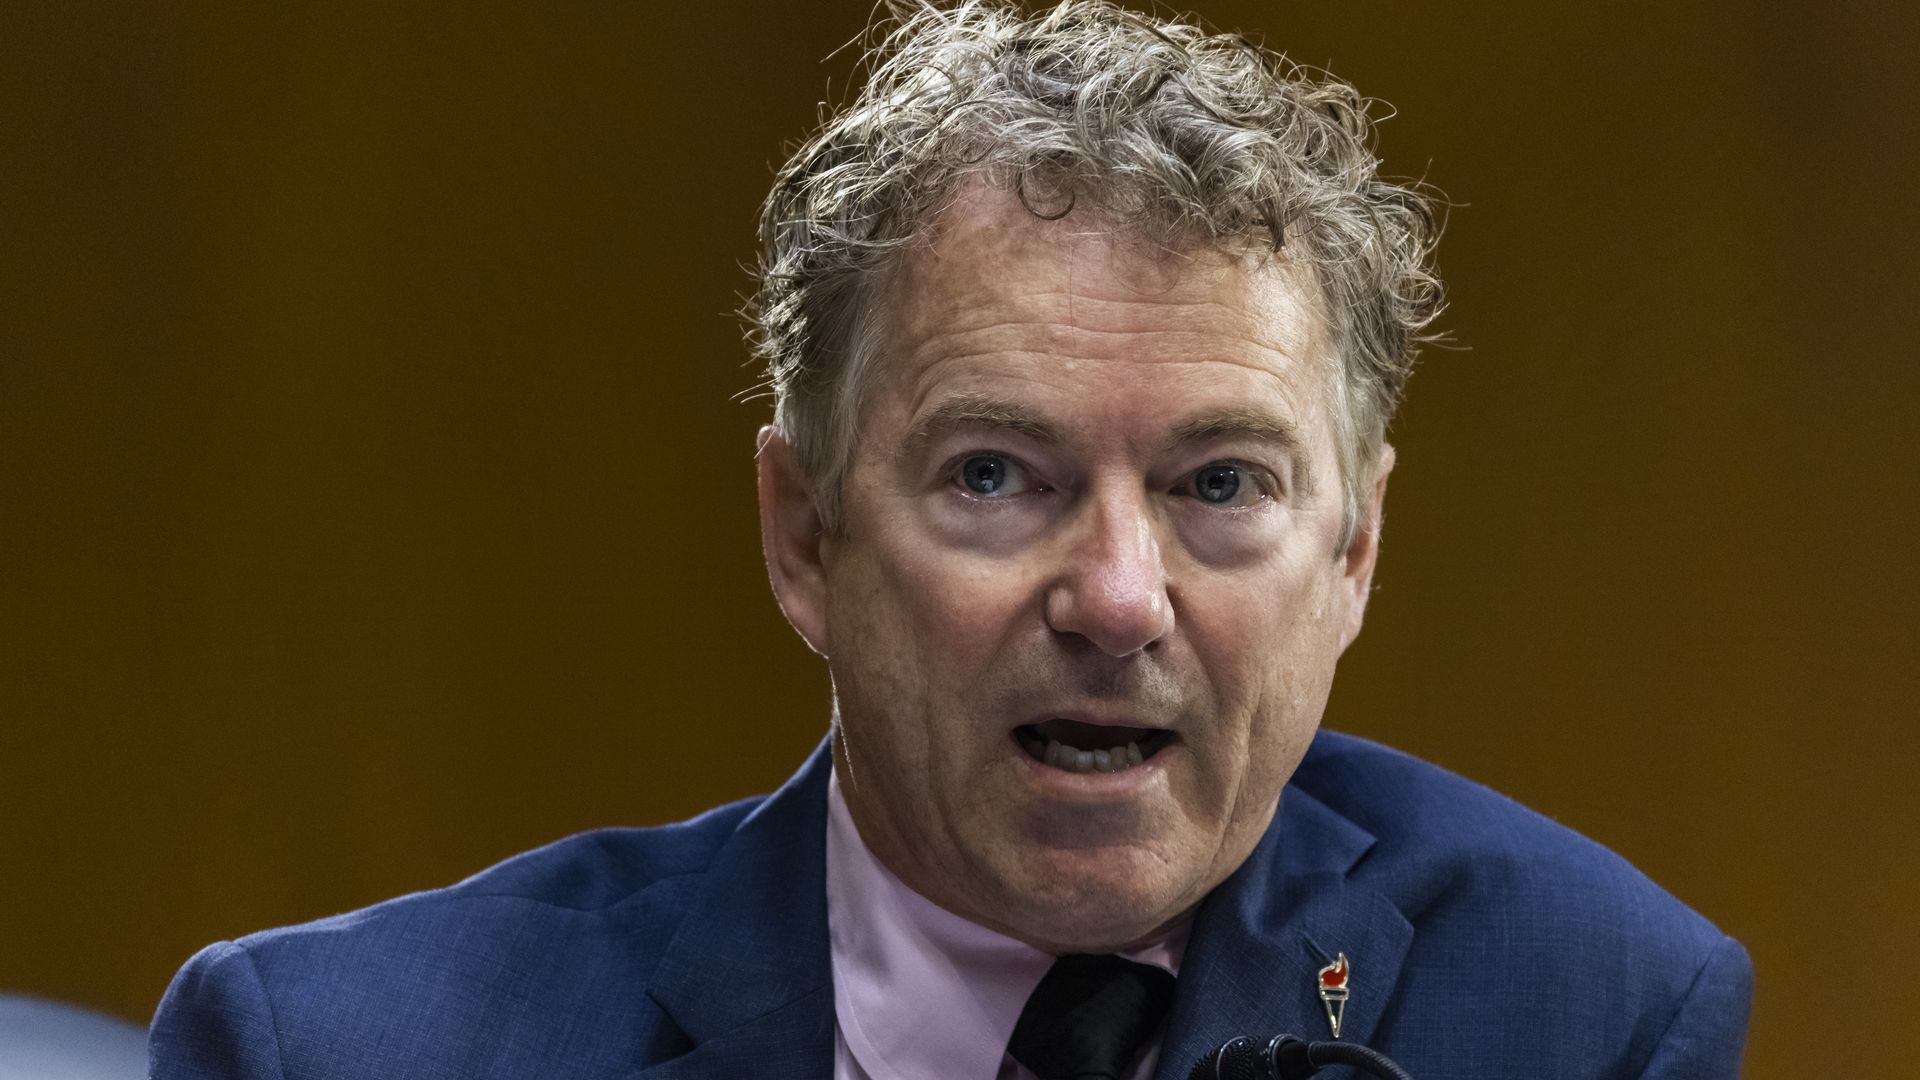 Rand Paul wears a suit and tie 